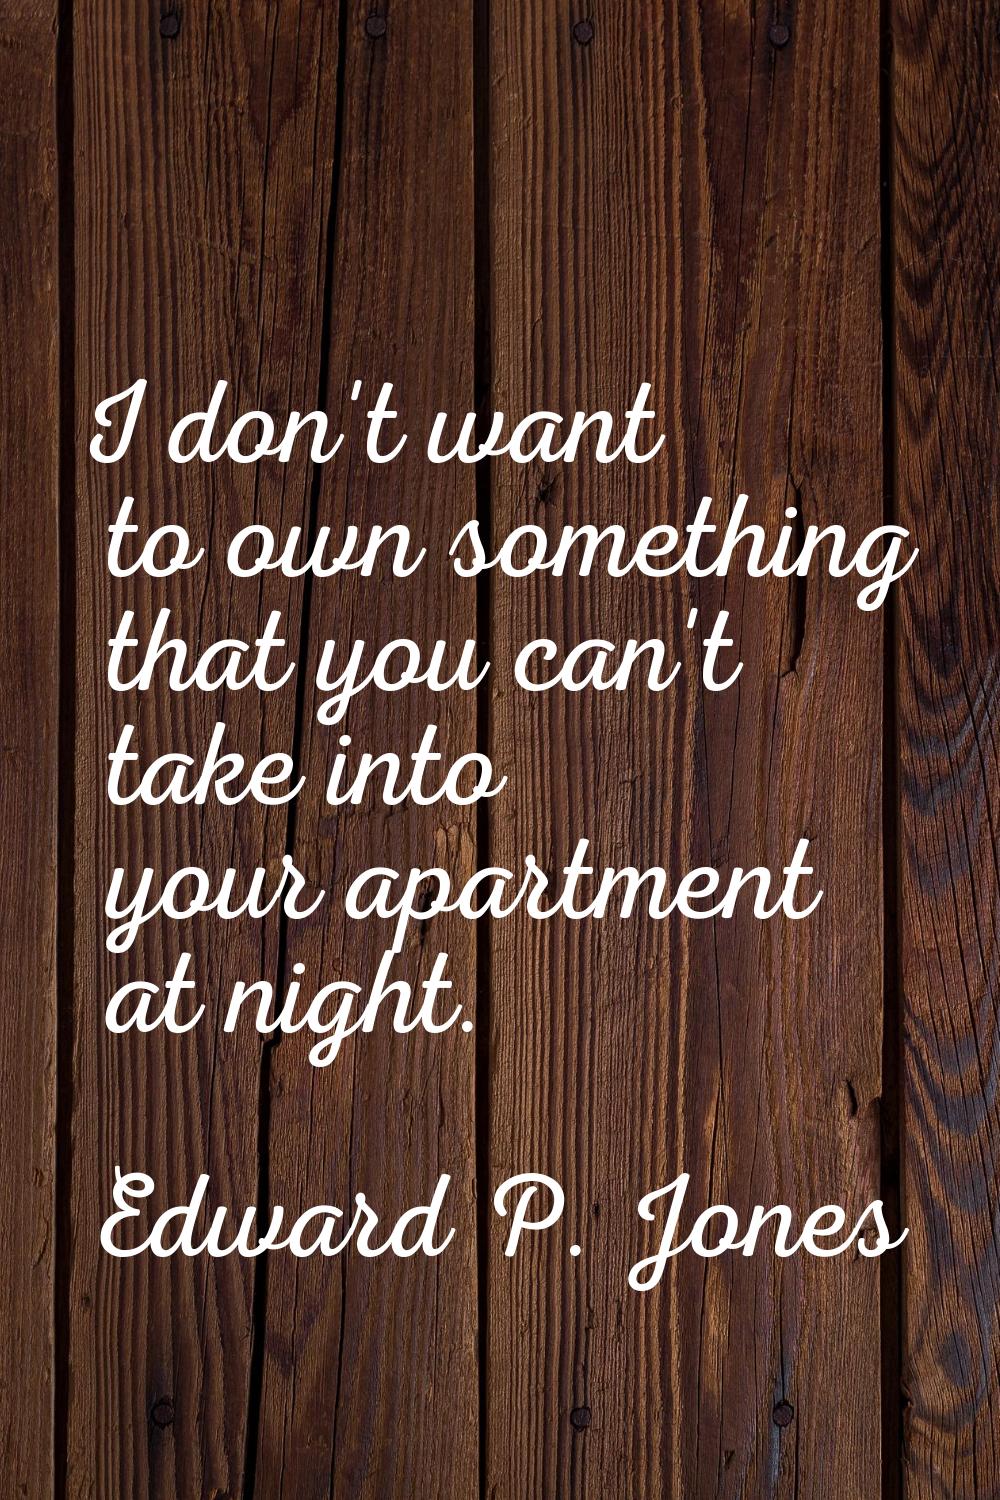 I don't want to own something that you can't take into your apartment at night.